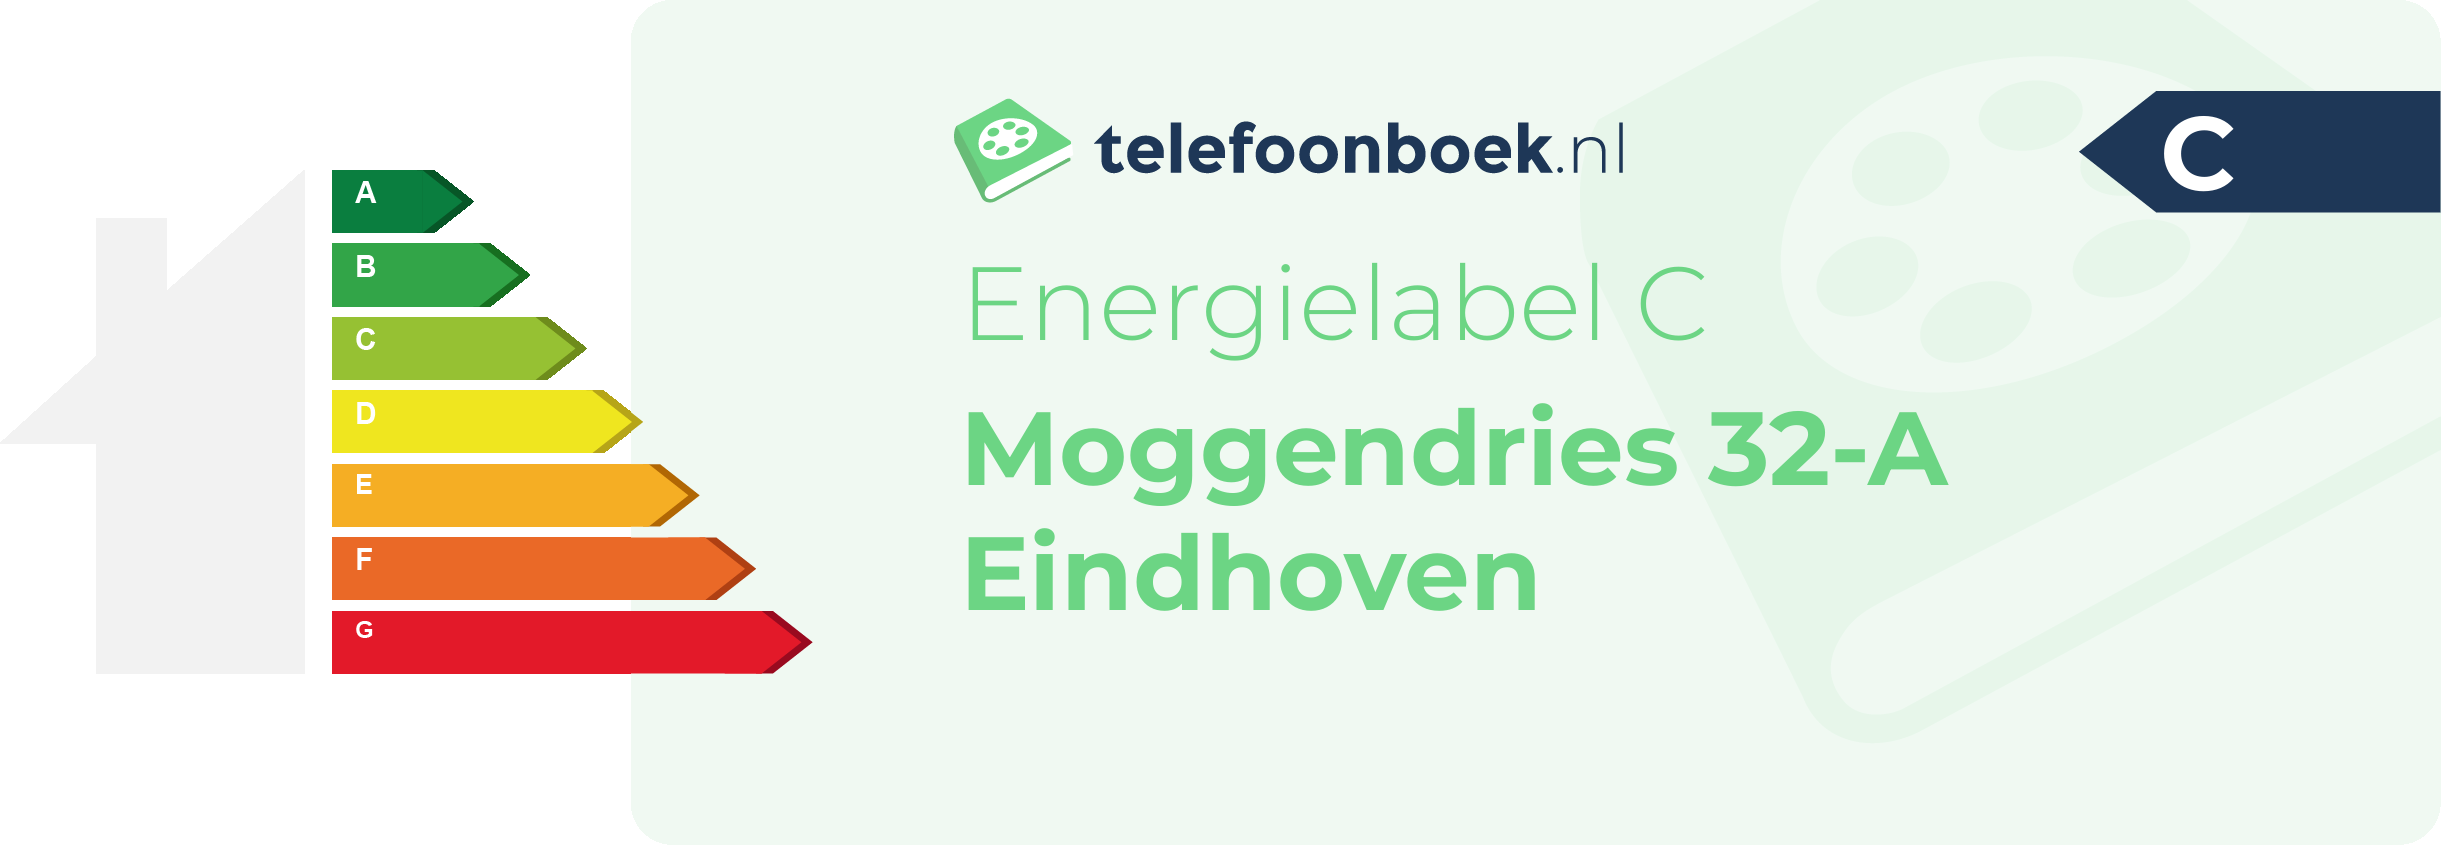 Energielabel Moggendries 32-A Eindhoven